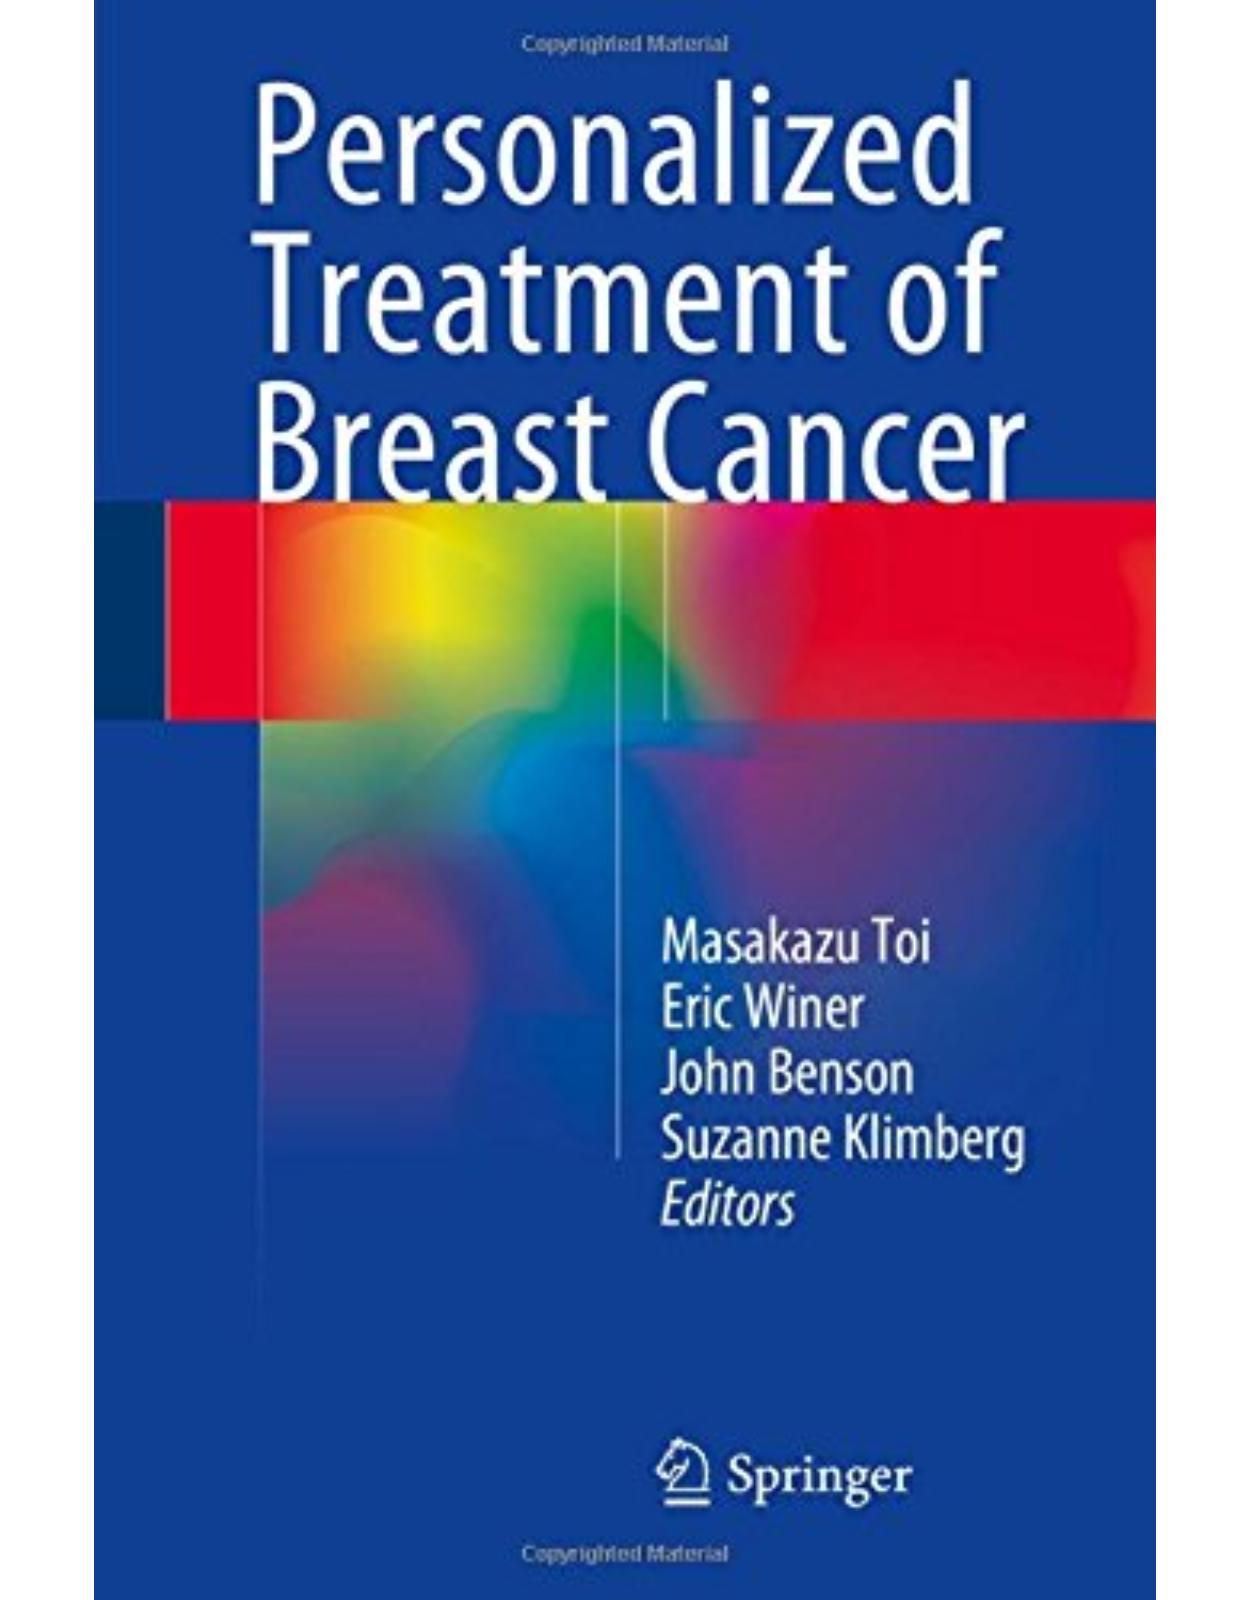 Personalized Treatment of Breast Cancer